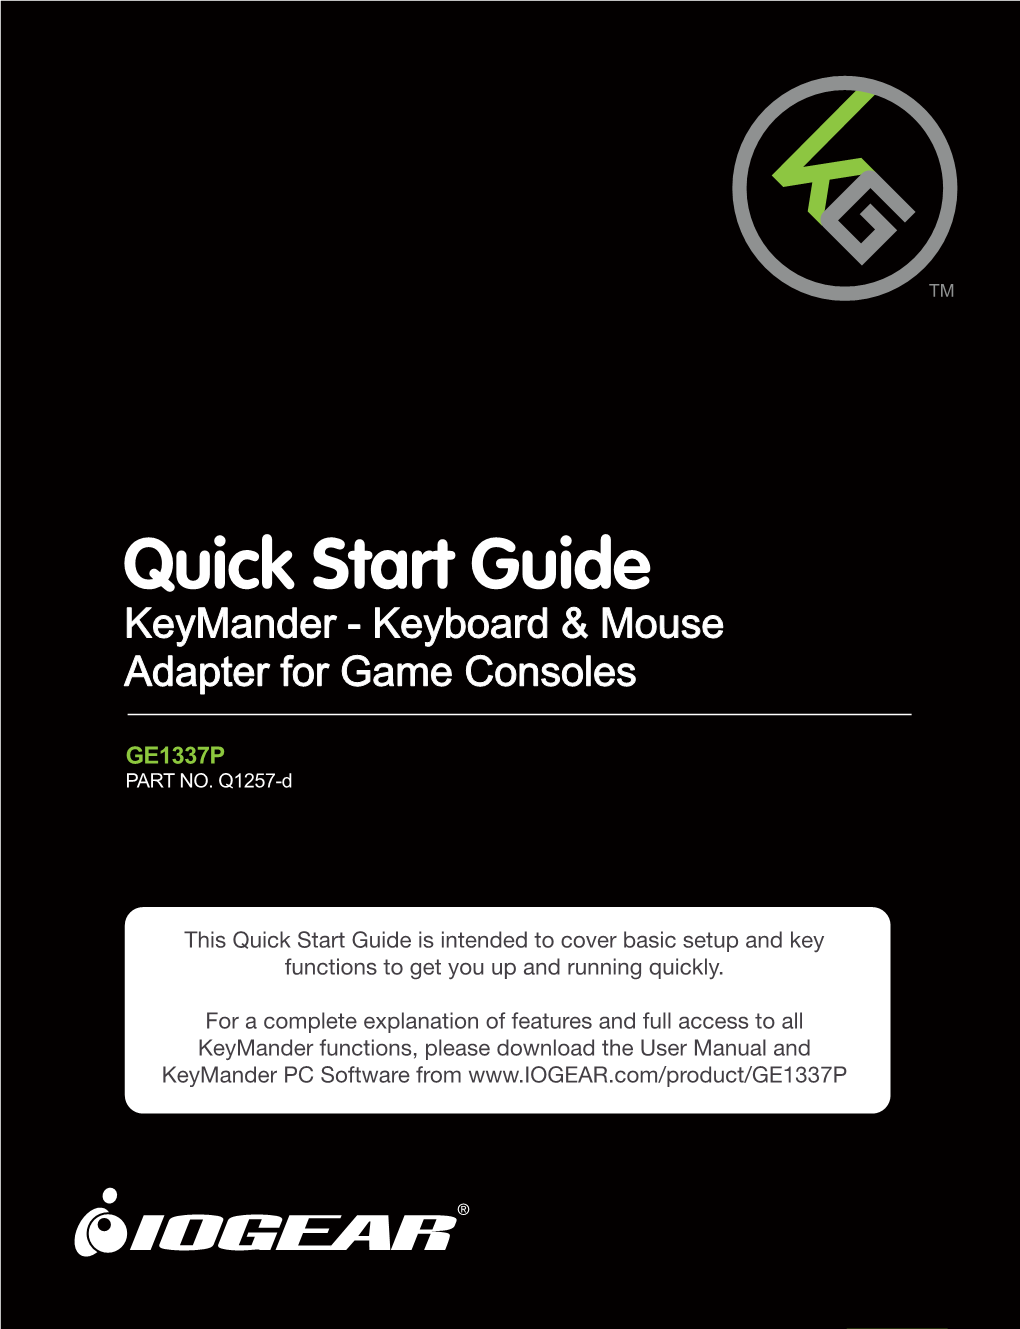 Download the User Manual and Keymander PC Software from Package Contents 1